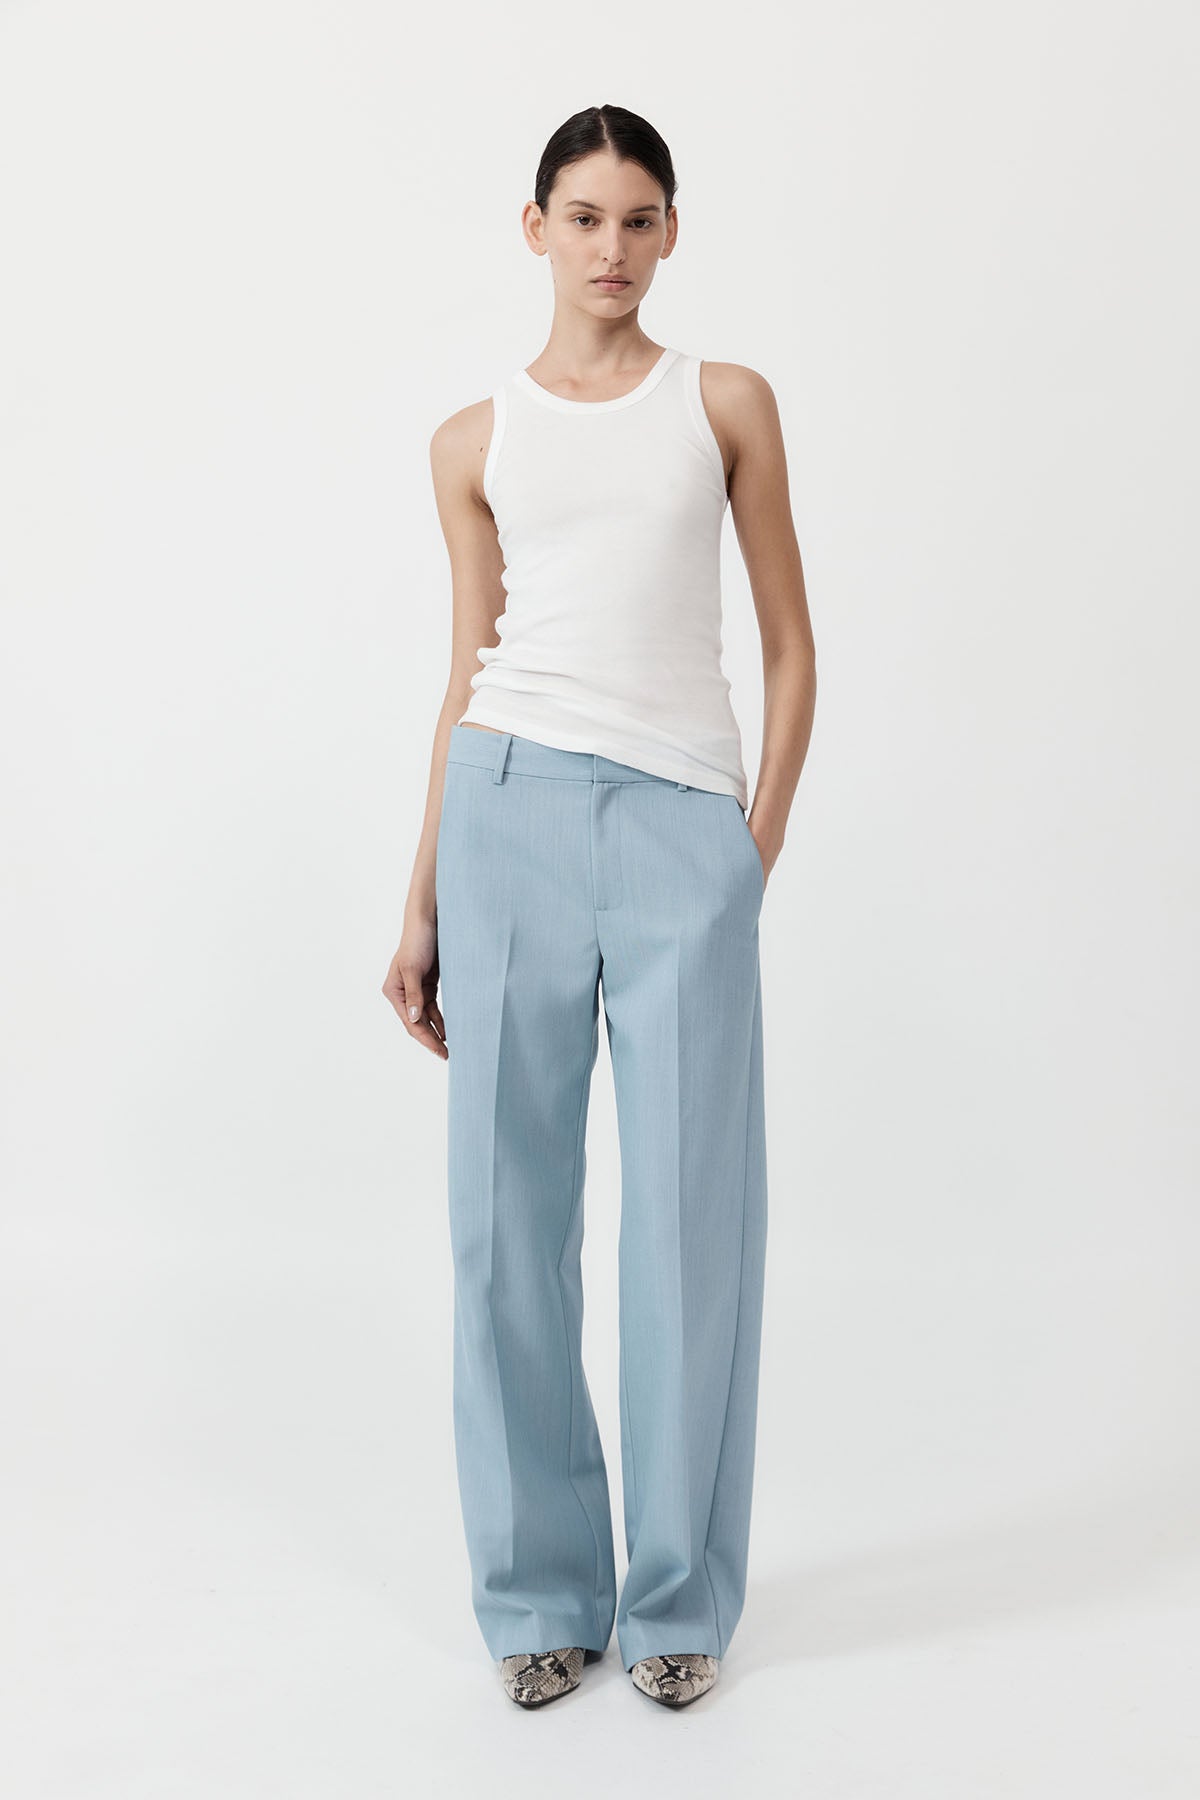 Carter Trousers - Stone Blue